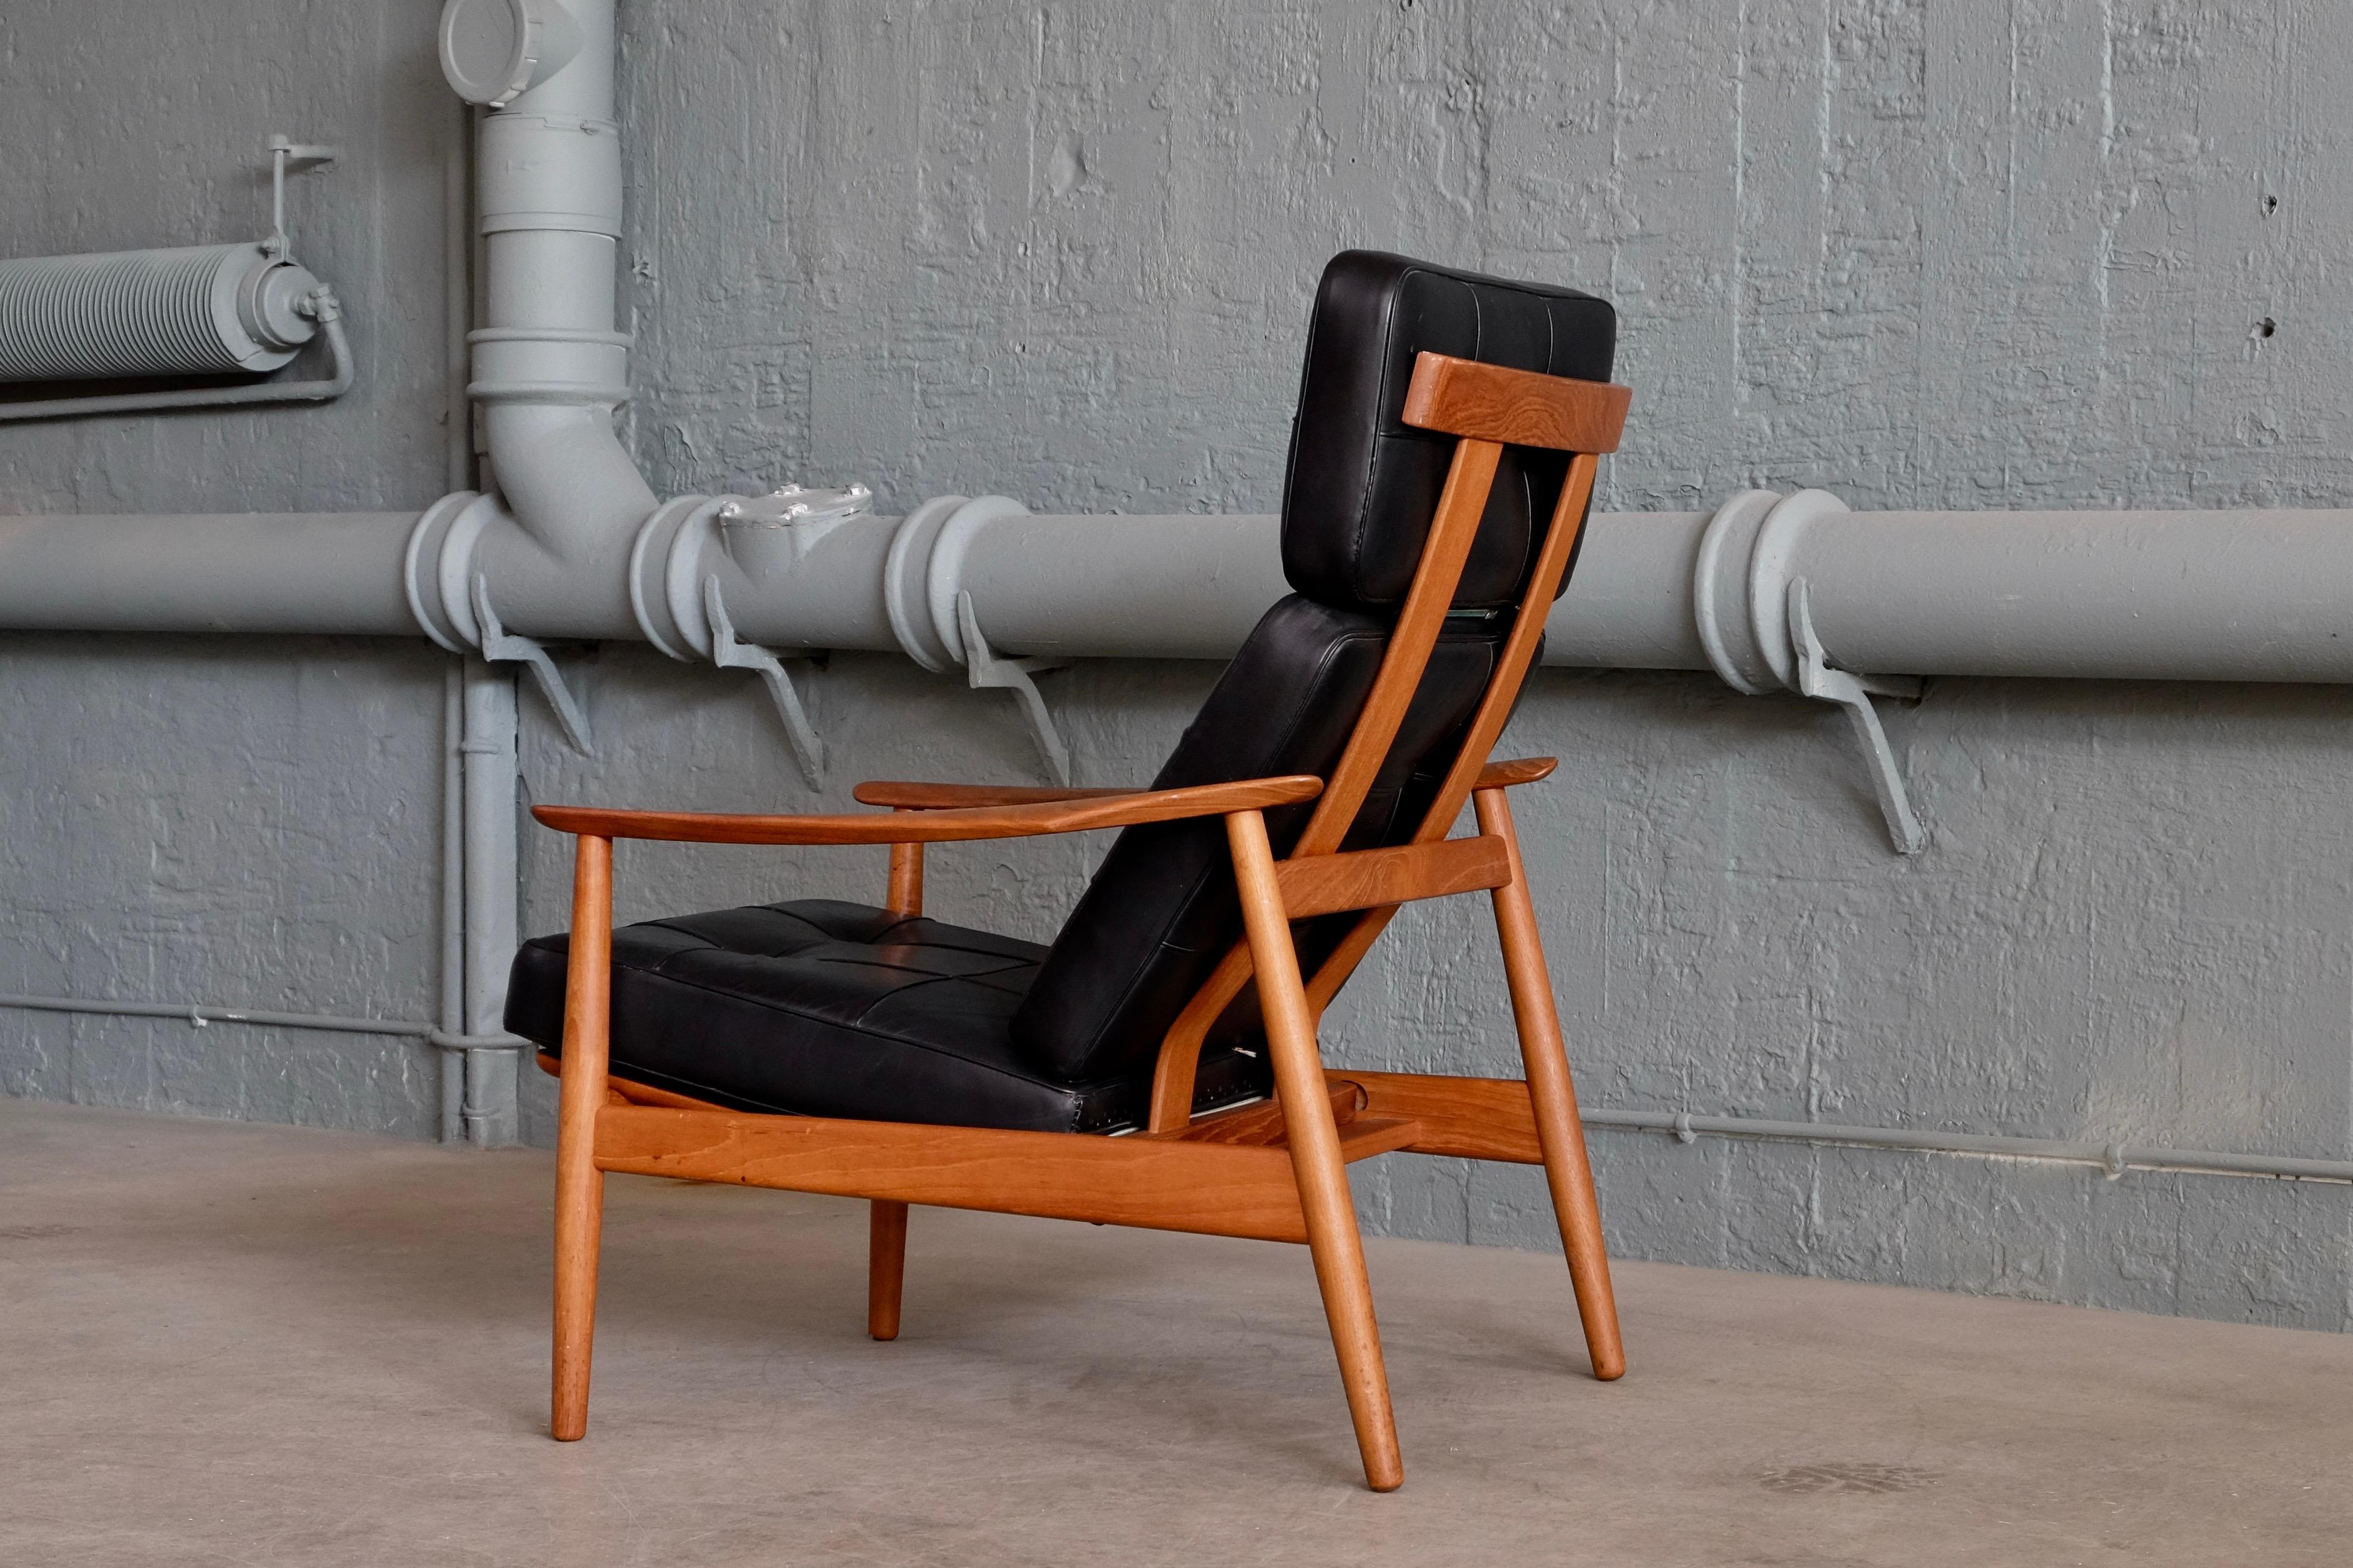 Rare reclining chair model FD-164 designed by Arne Vodder.
Three adjustable positions
Teak, original black leather
Excellent vintage condition, with minor signs of usage and patina

Dimensions (W x D x H): 77 x 90 x 100 cm, SH: 43 cm.
 